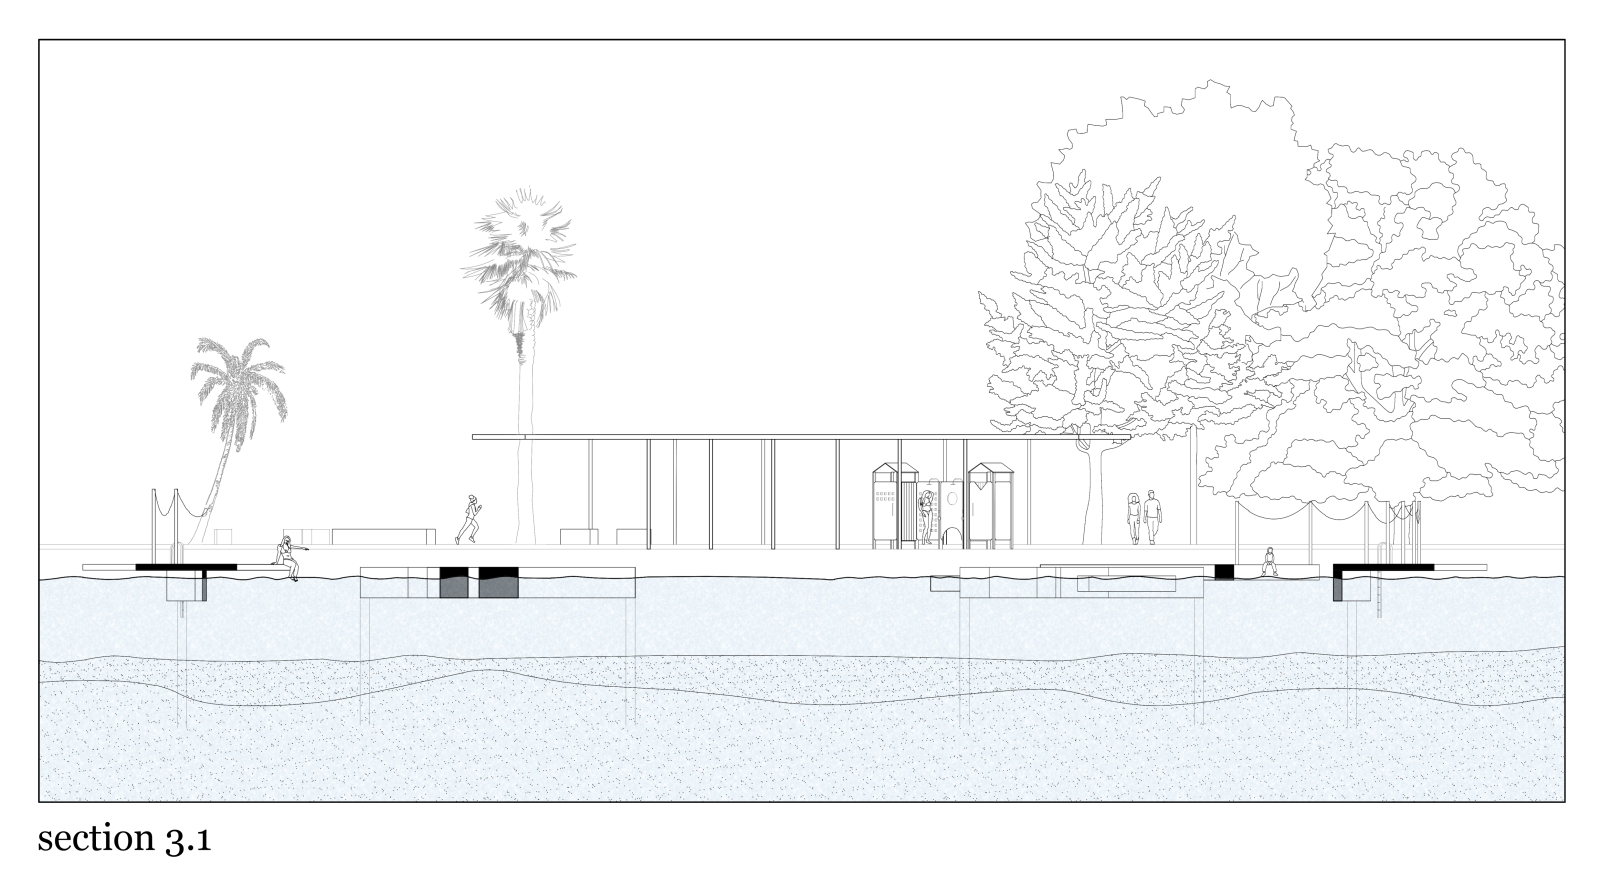 Archisearch Coast to Coast_ 3rd Prize - Porto Heli seafront design competition | by Object-e